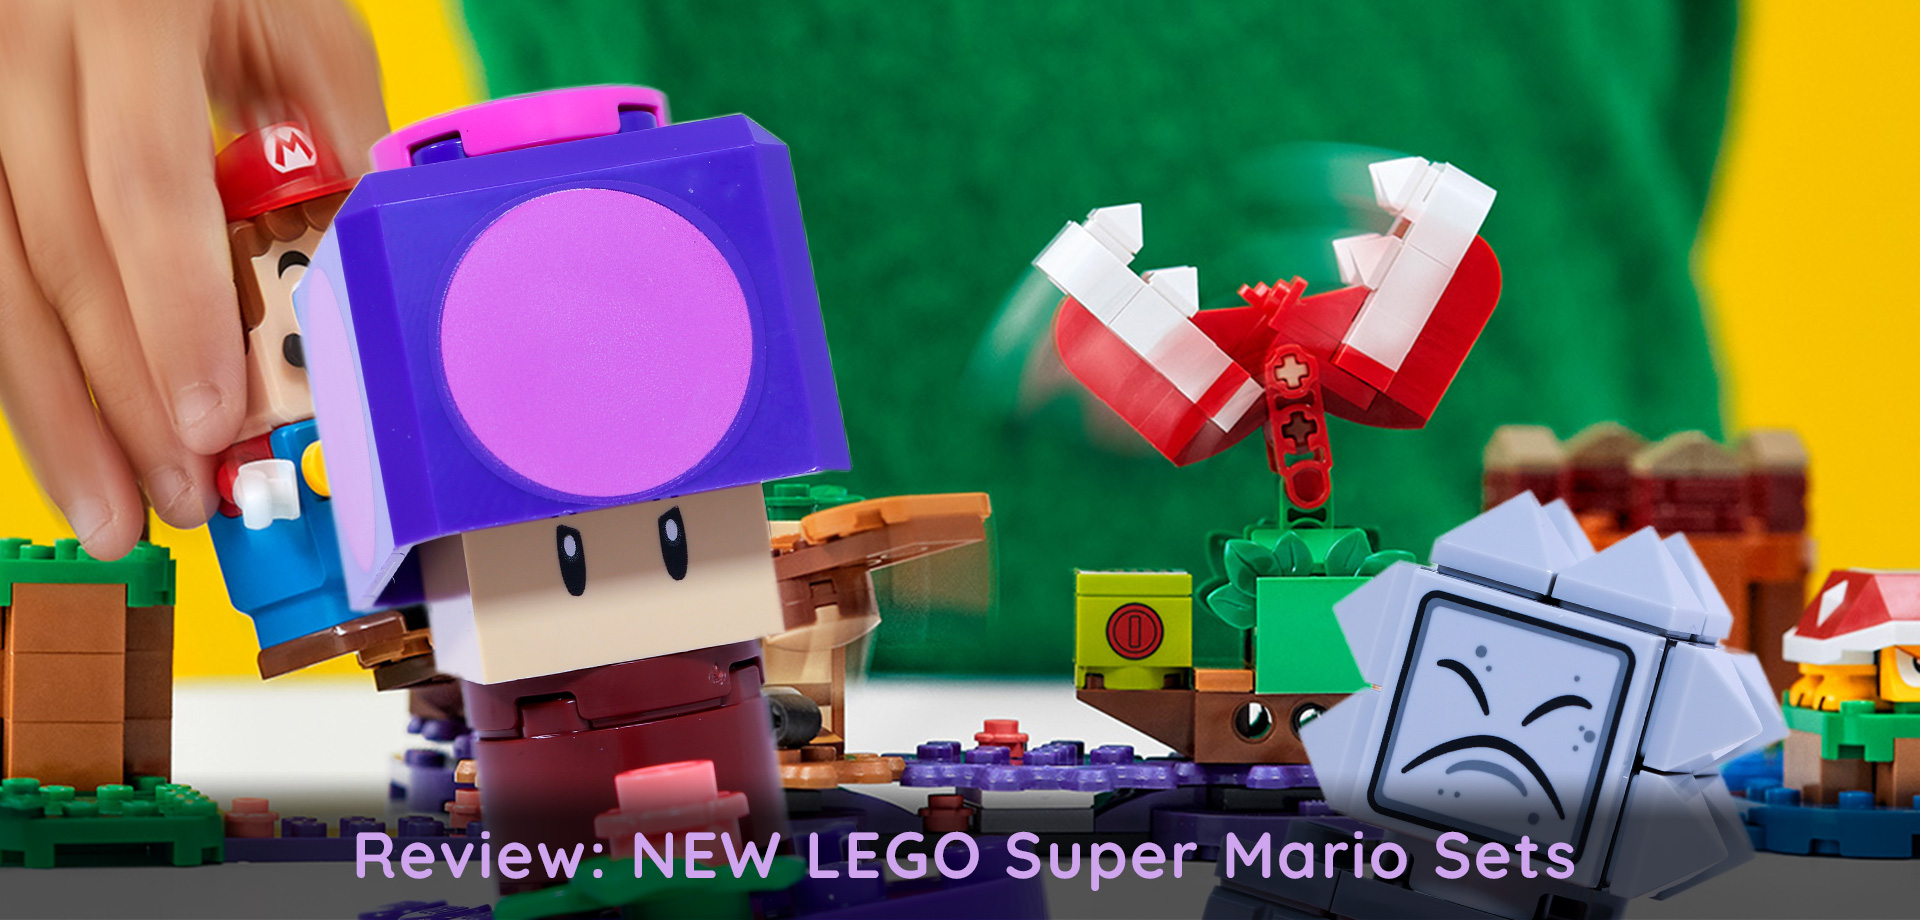 Review: Playing New LEGO Super Mario For 2021 With The Family